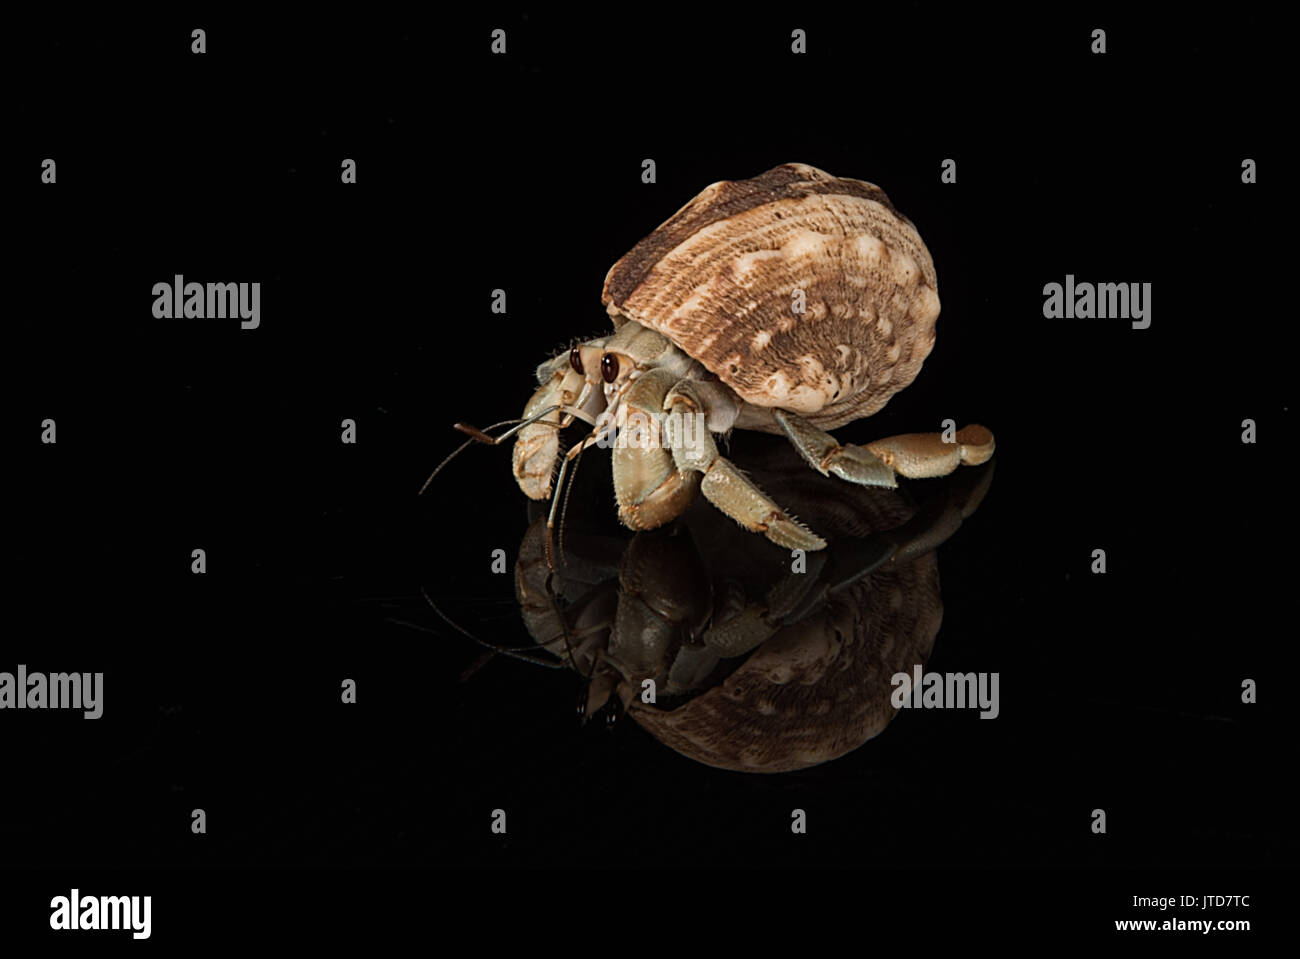 A hermit crab emerged for its host shell with reflection and set on a black background Stock Photo